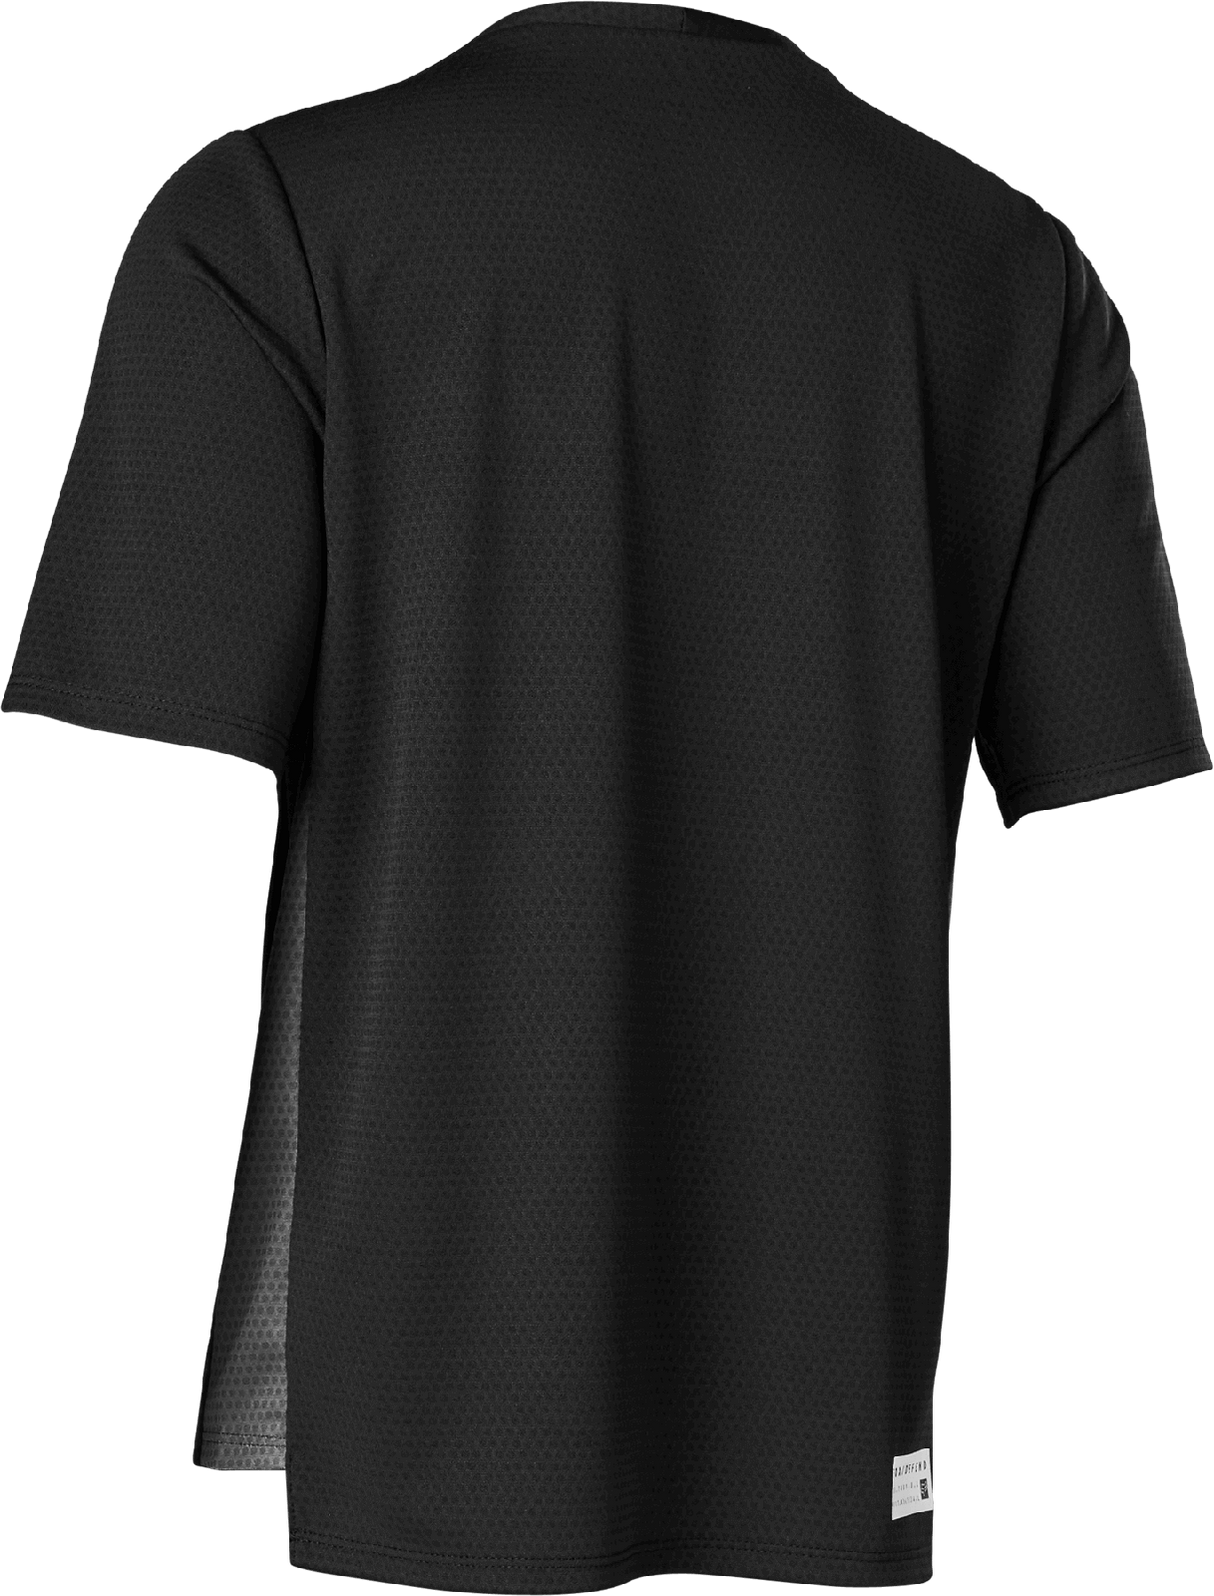 Fox Youth Defend SS Cycling Jersey - Black